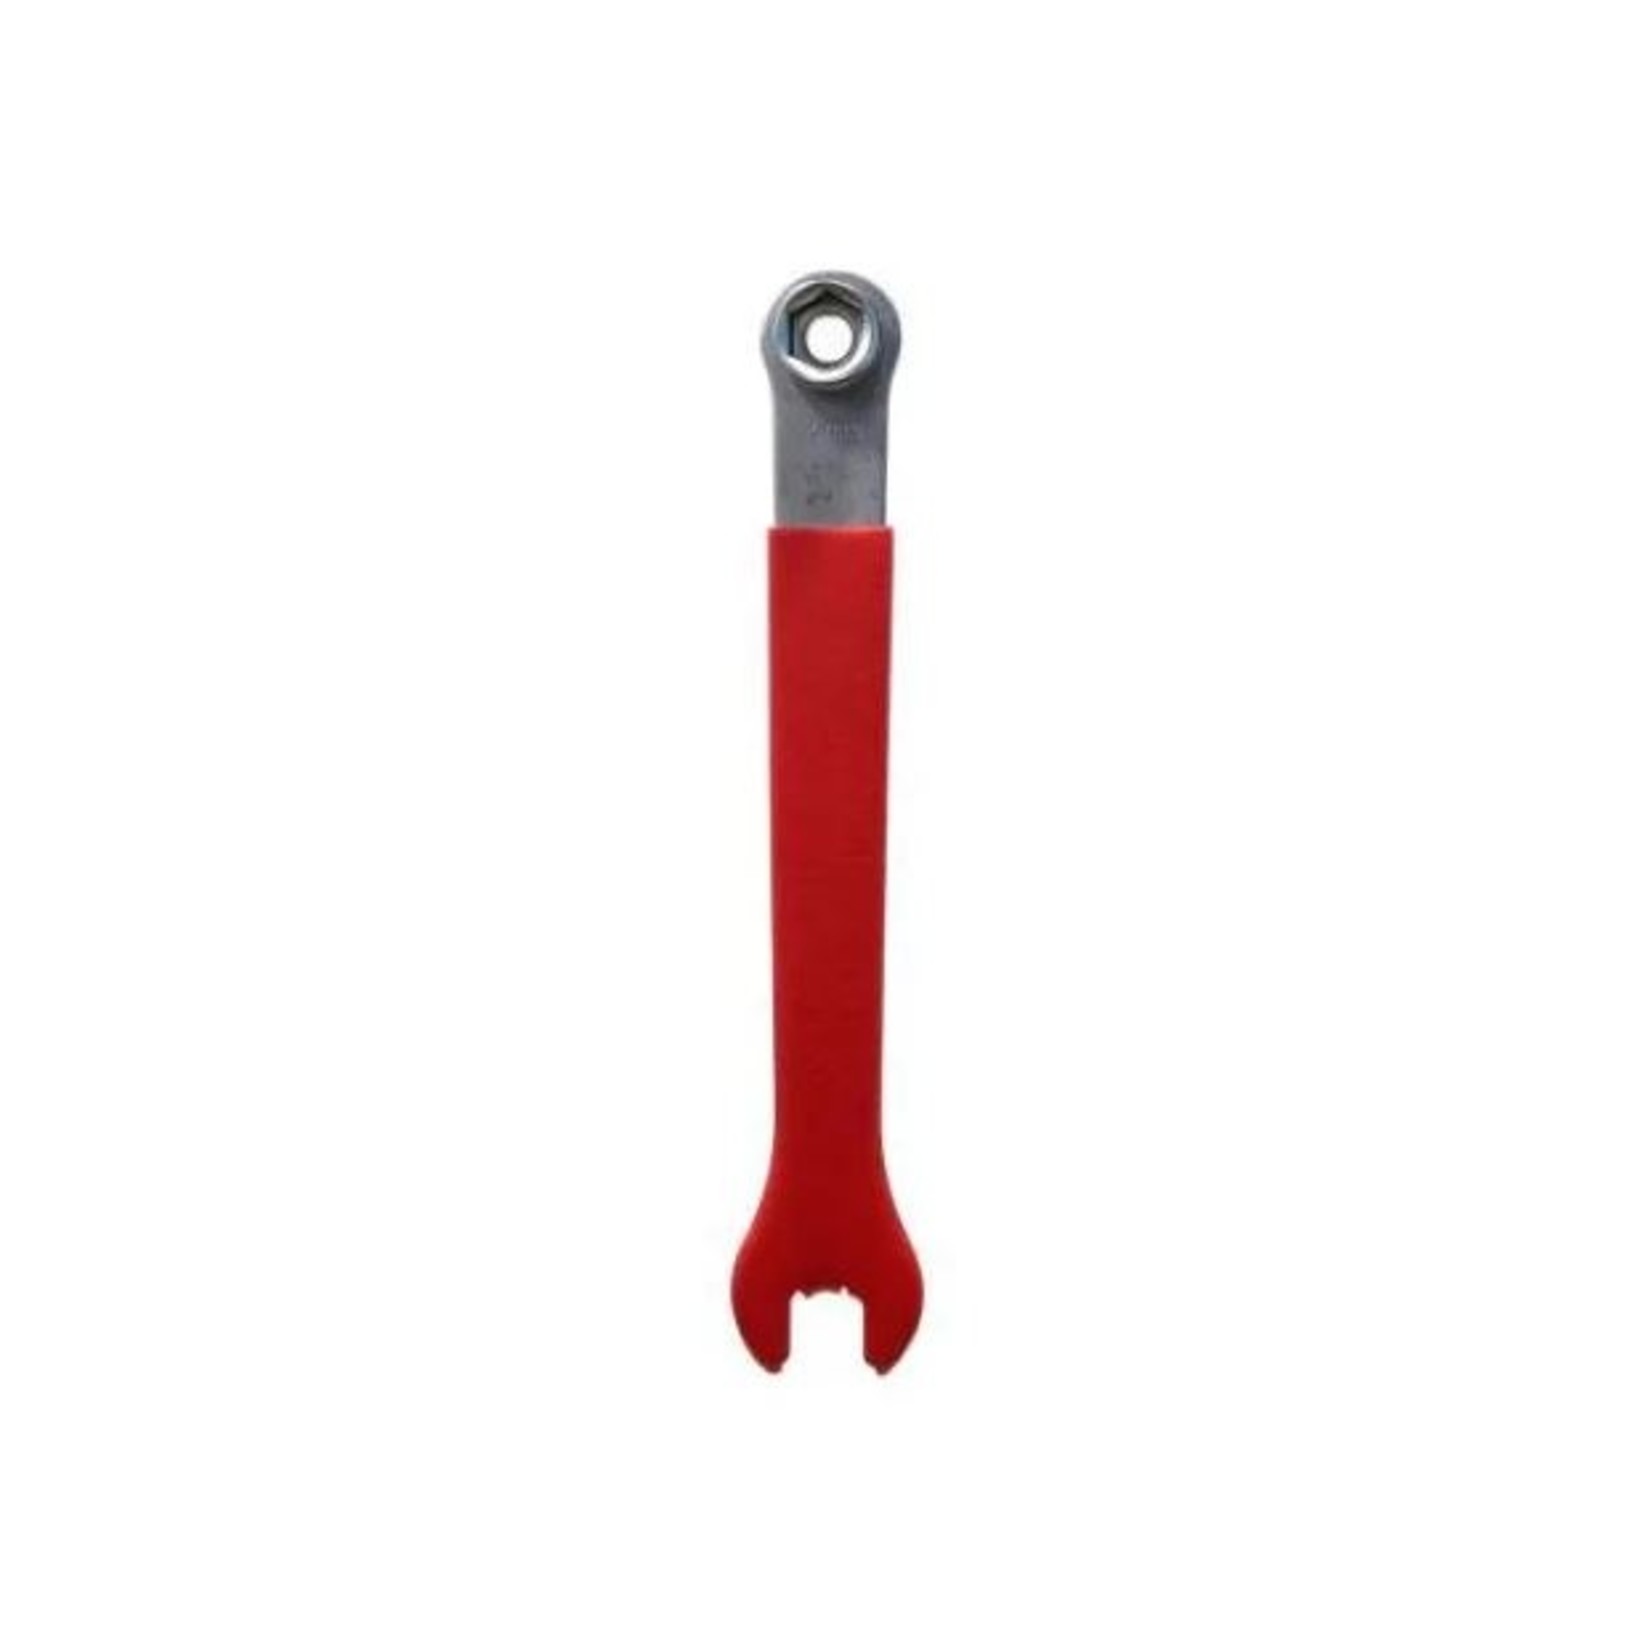 Incomex Trading Pty Ltd Pro-Series - Bike/Cycling Tool - Pedal Wrench 15mm & Box Wrench 14/15mm - Red